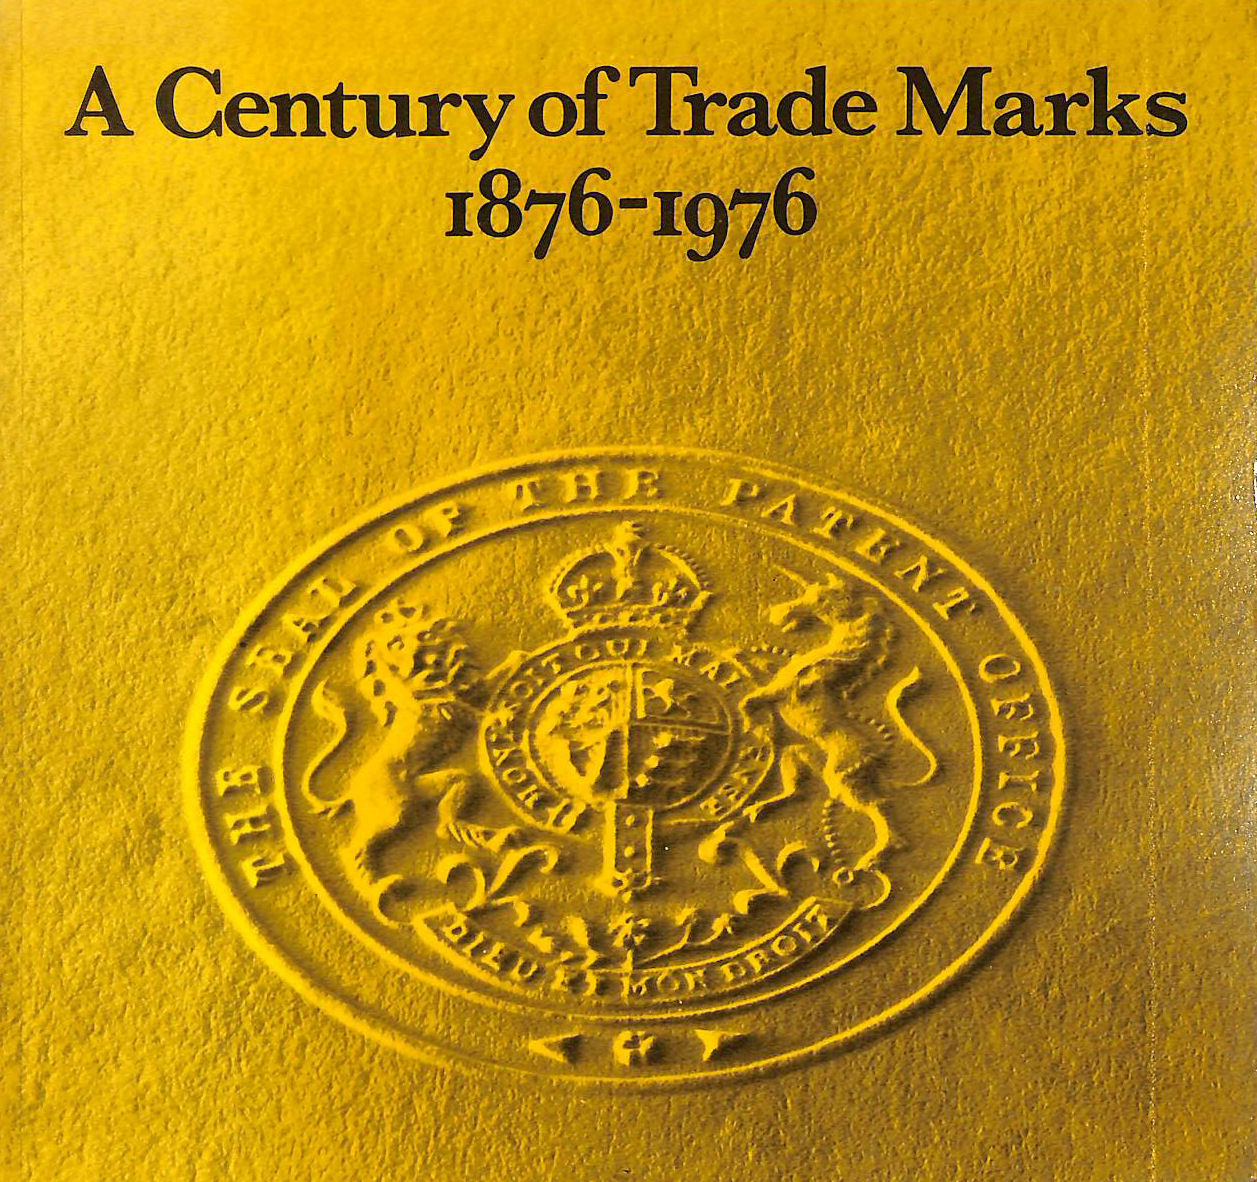  - Century of Trade Marks, 1876-1976: Commentary on the Work and History of the Trade Marks Registry